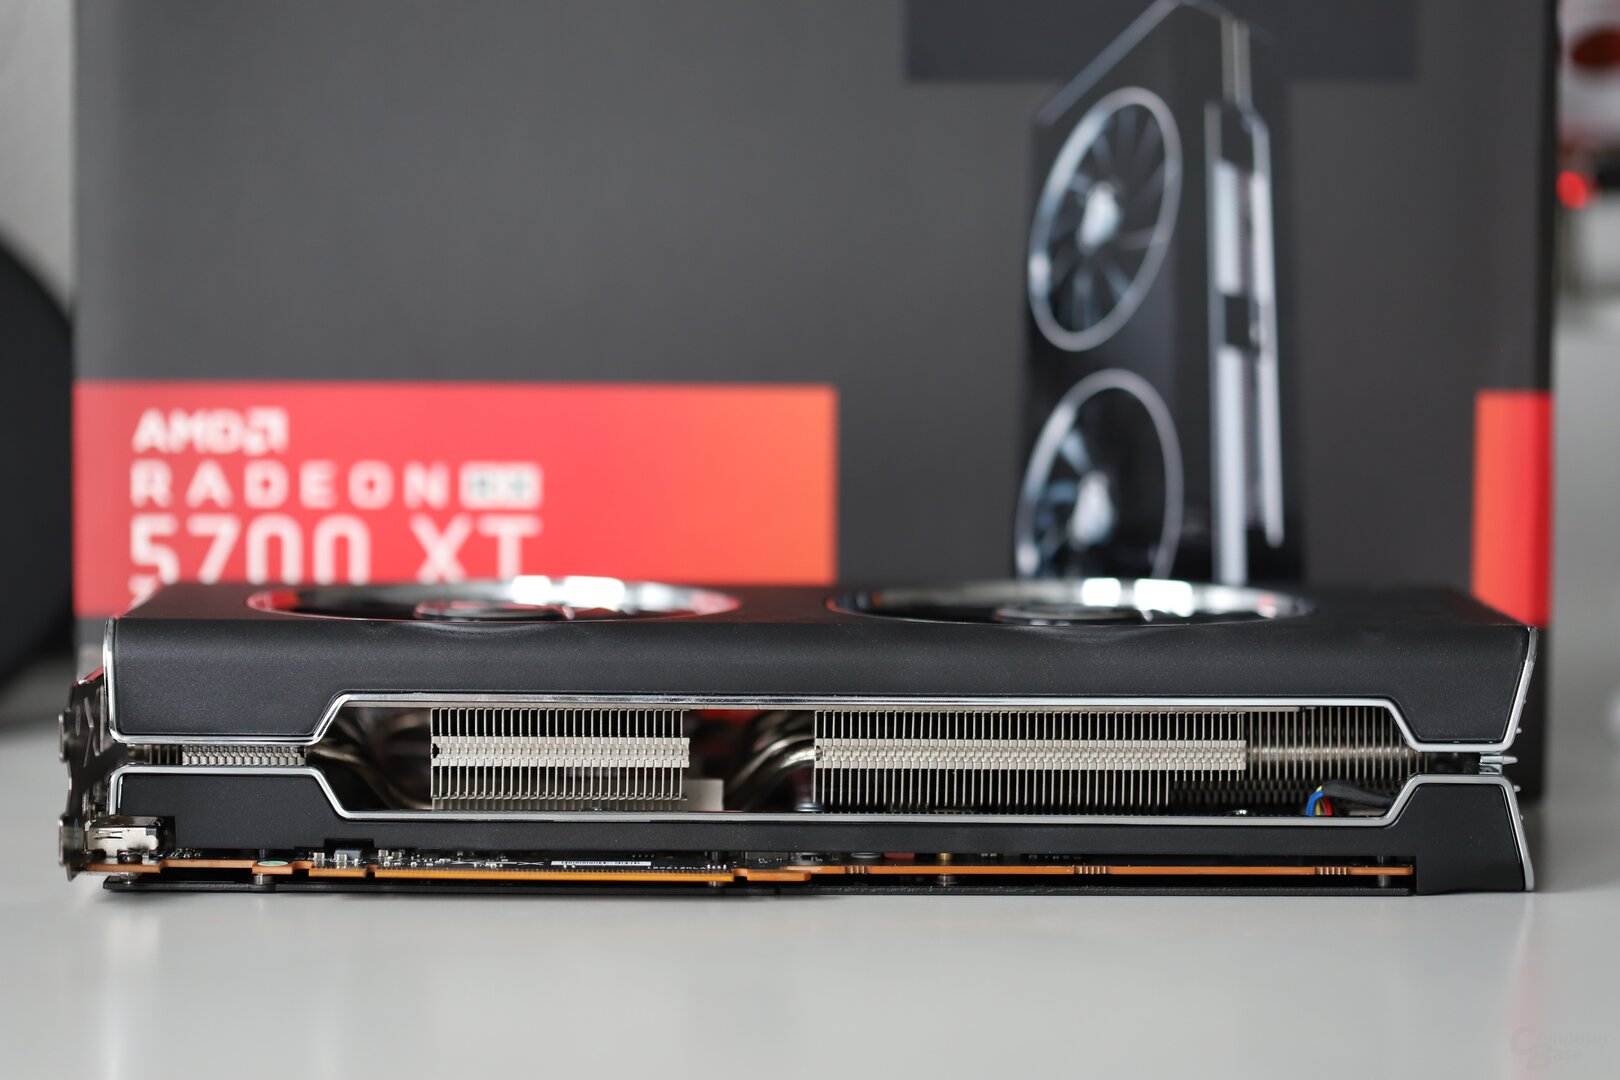 XFX Radeon RX 5700 XT THICC2 in the test